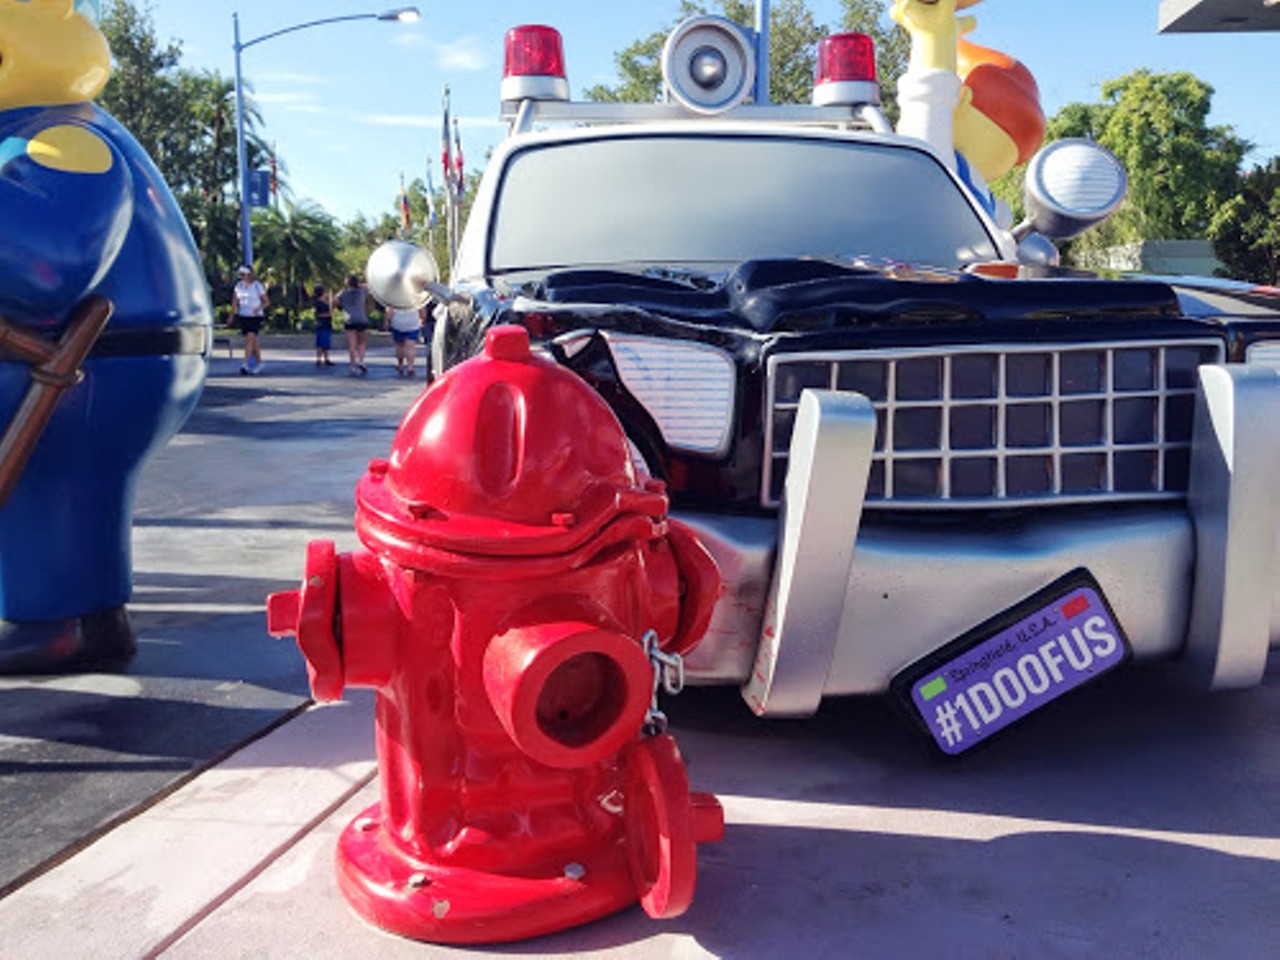 Chief Wiggum's fire hydrant should soon squirt water.